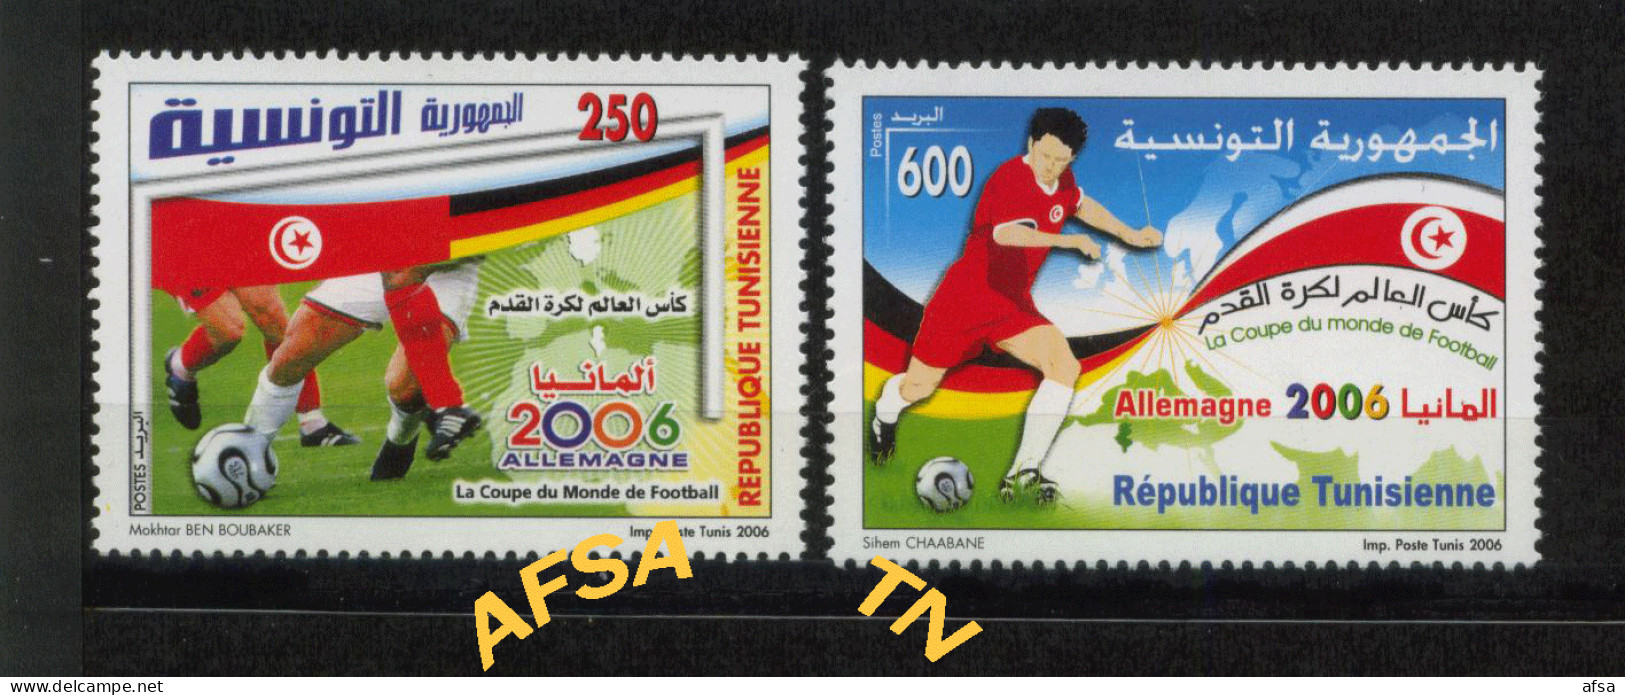 Football World Cup, Germany 2006 (Tunisia 2006 )// La Coupe Du Monde De Football, Allemagne 2006 (Tunisie 2006) - 2006 – Germany